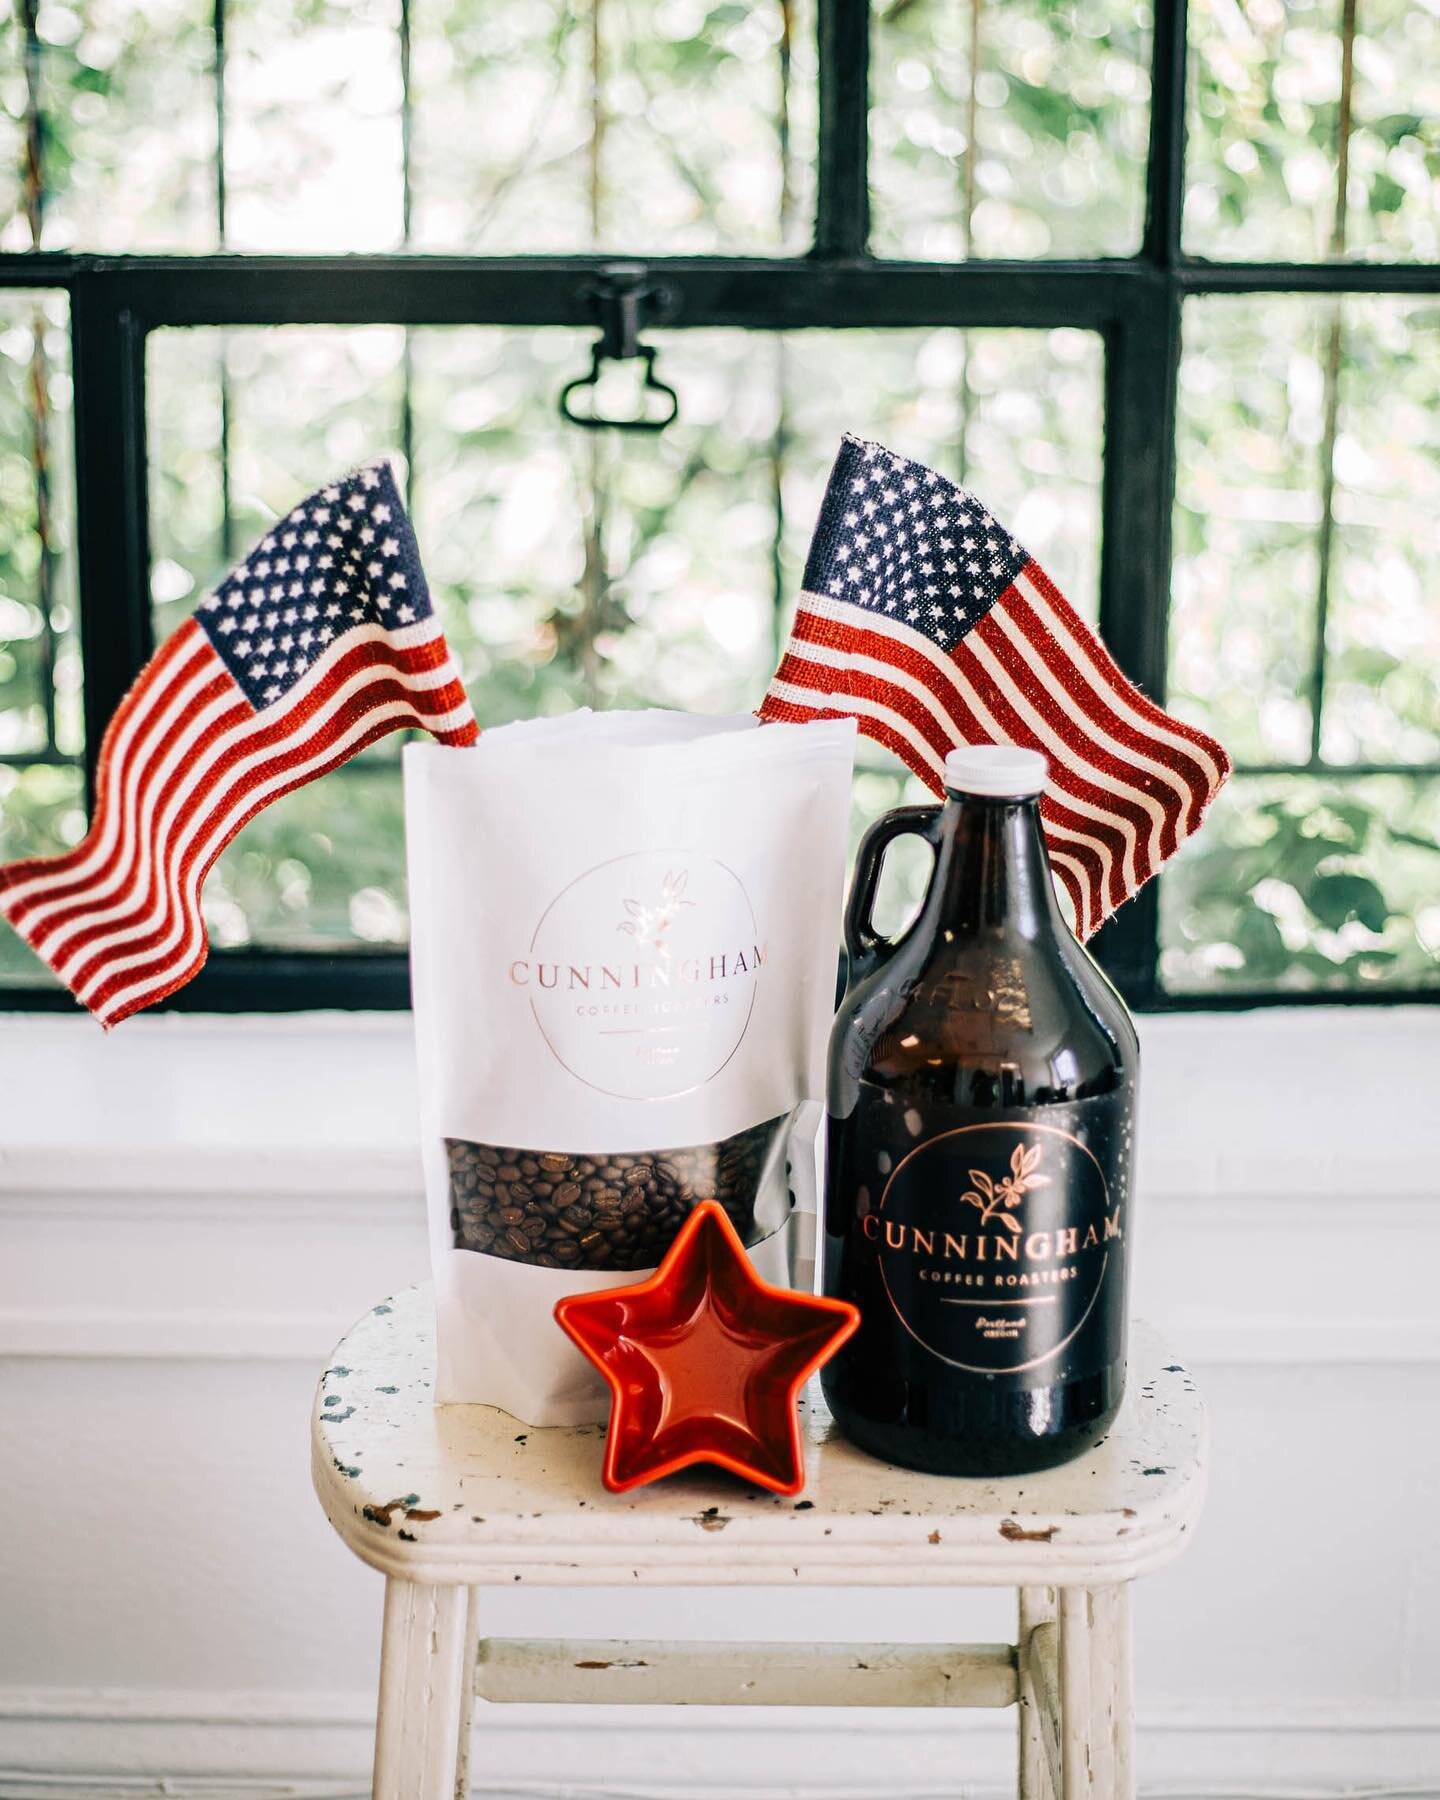 Red, white, and B R E W 🇺🇸

Cunningham cold brew concentrate, delivered to your door 💋

order link in bio❤️🤍💙
 
📸 @jamieleonettiphotography 

#coldbrewcoffee #portlandcoffee #familybuisness #coffeedelivery #fourthofjuly #coldbrewgrowlers